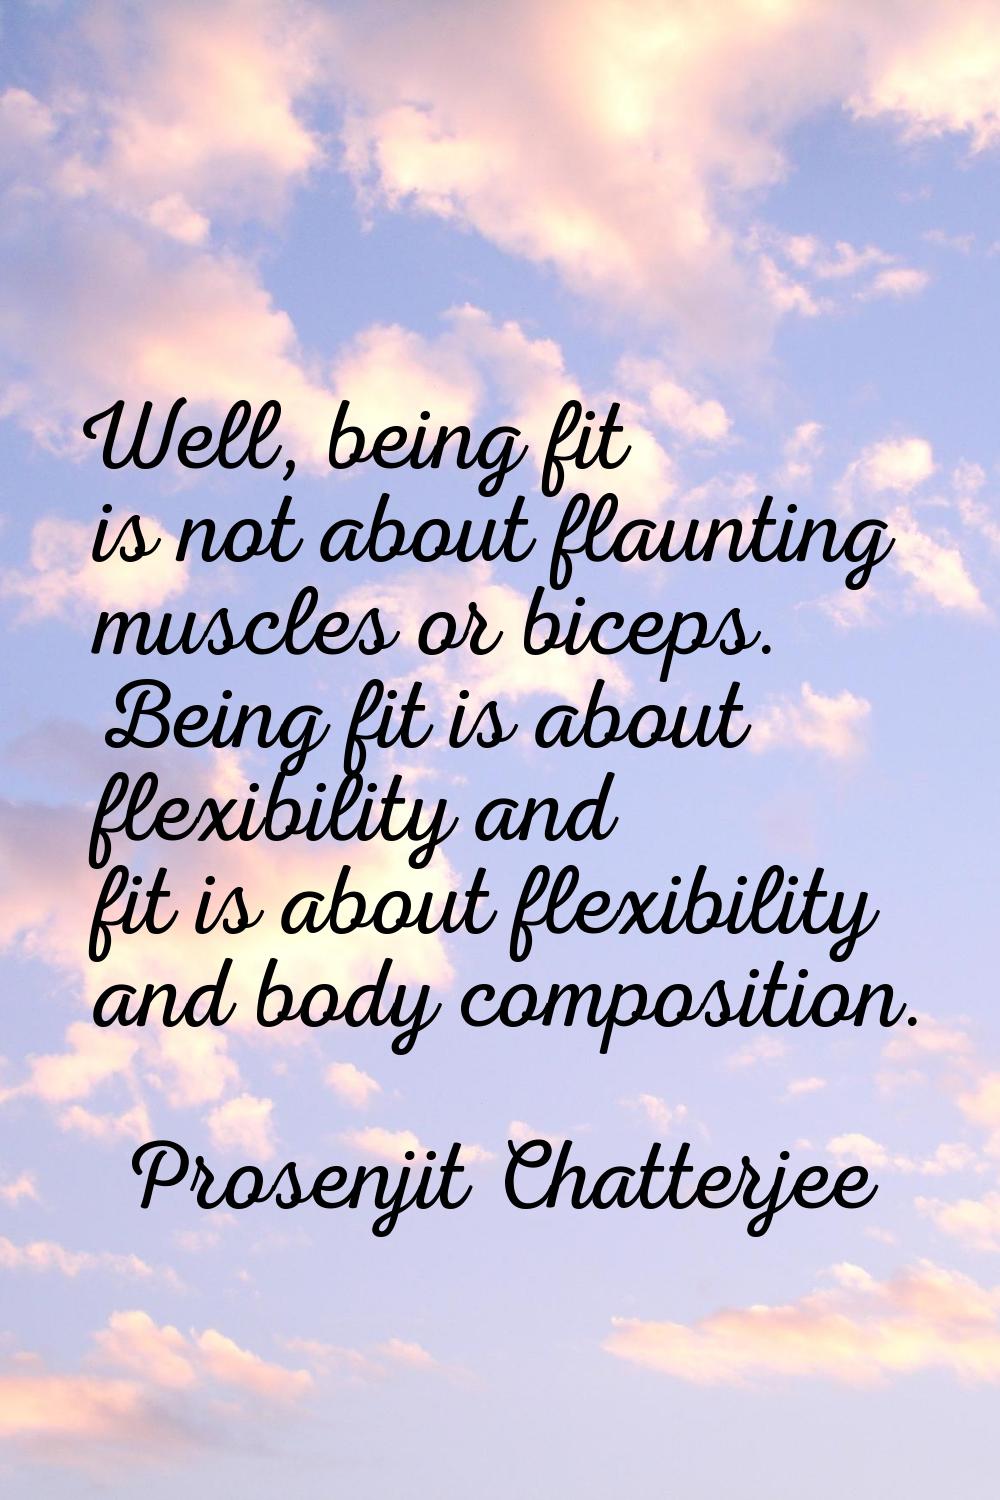 Well, being fit is not about flaunting muscles or biceps. Being fit is about flexibility and fit is